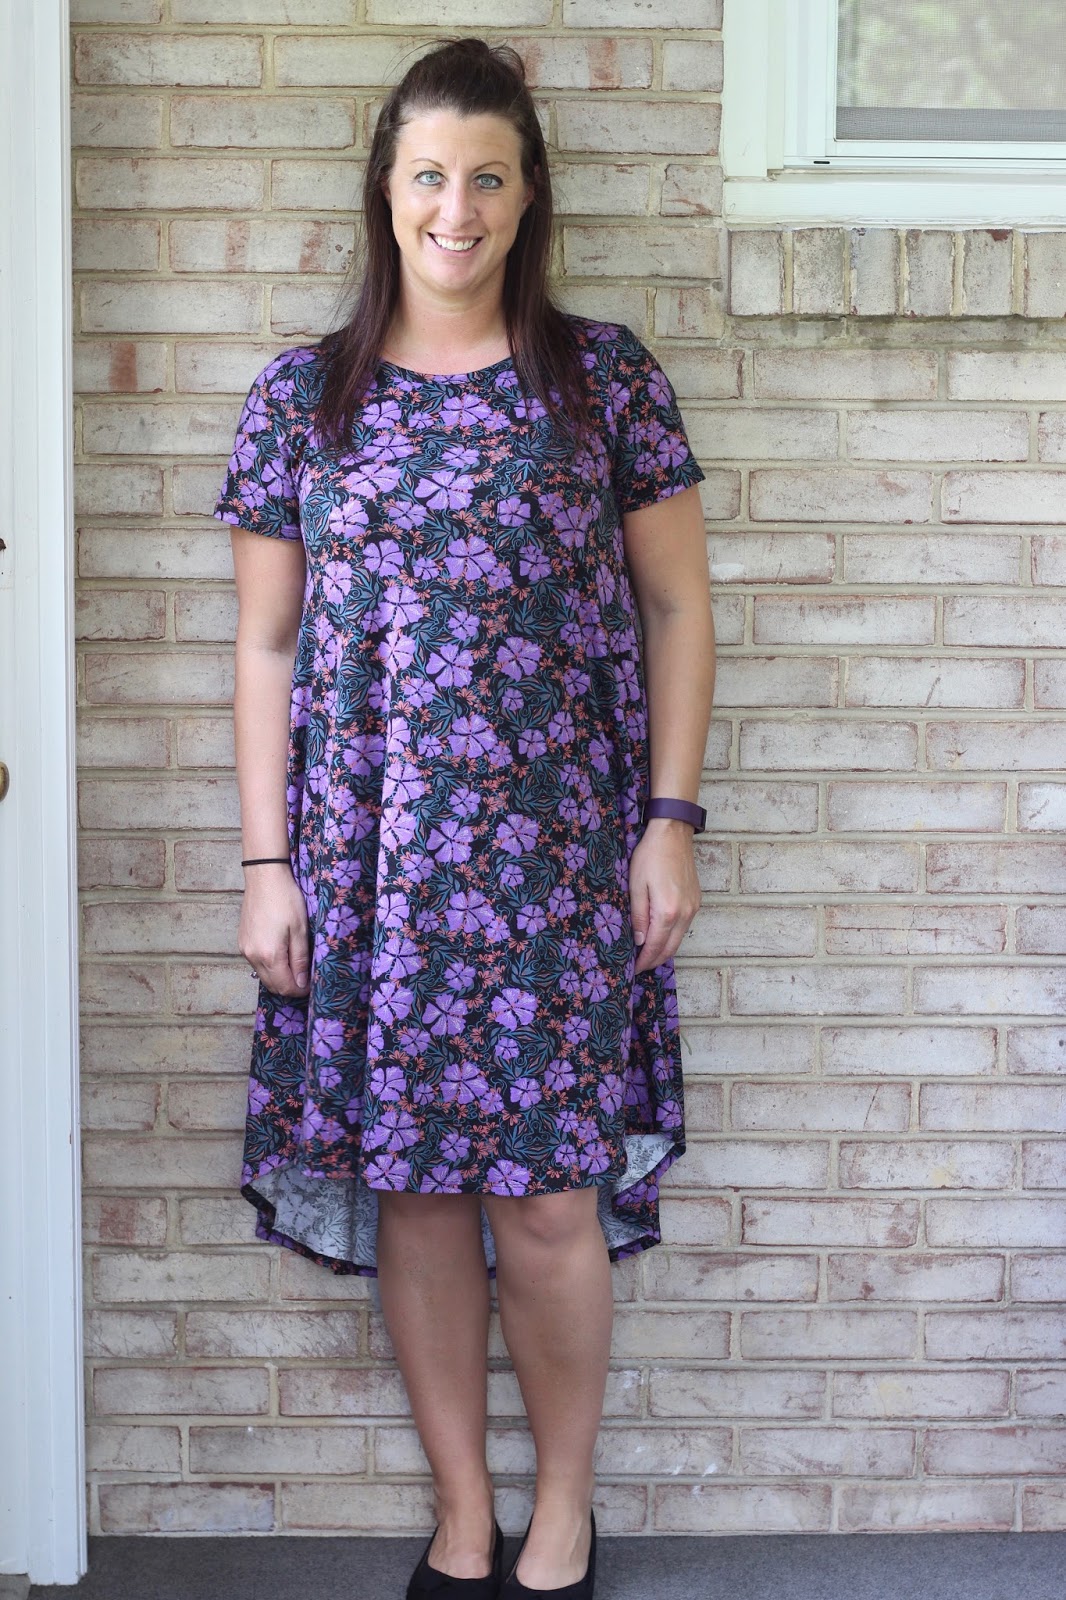 Ask Away Blog: Outfit of the Day: Floral Dress